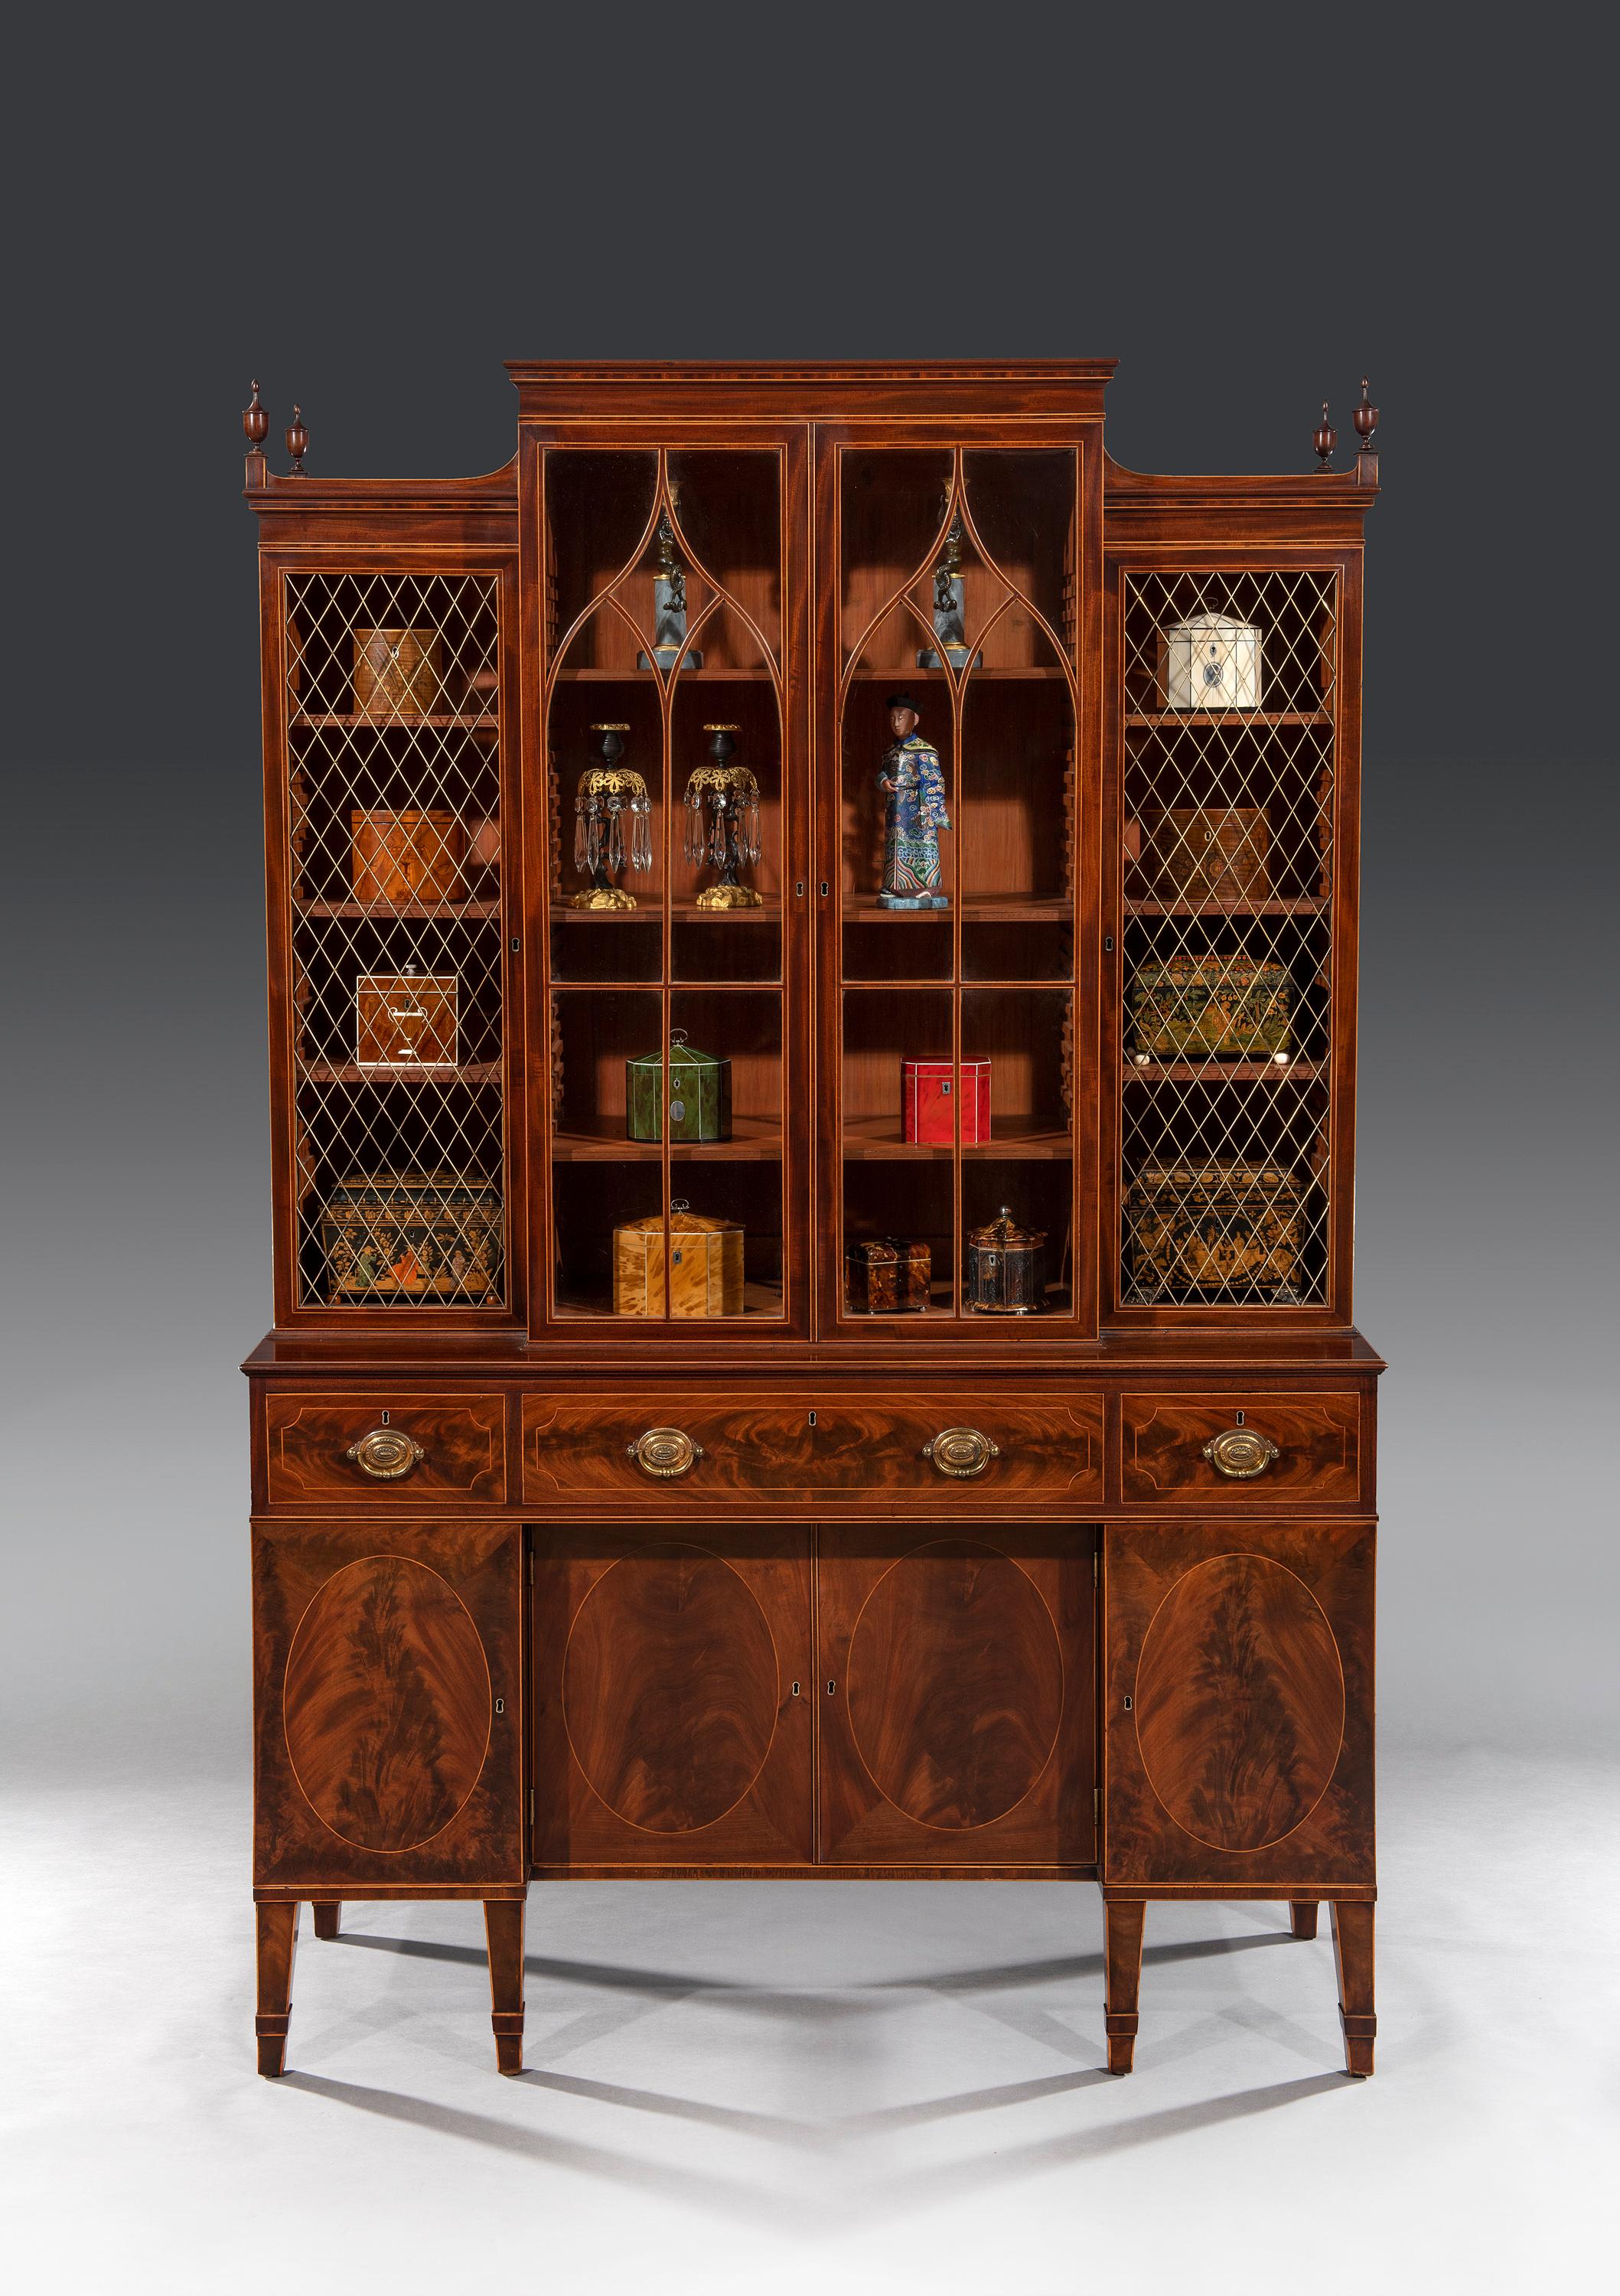 George III Sheraton Period Flamed Mahogany Breakfront Cabinet Bookcase In Good Condition For Sale In Bradford on Avon, GB